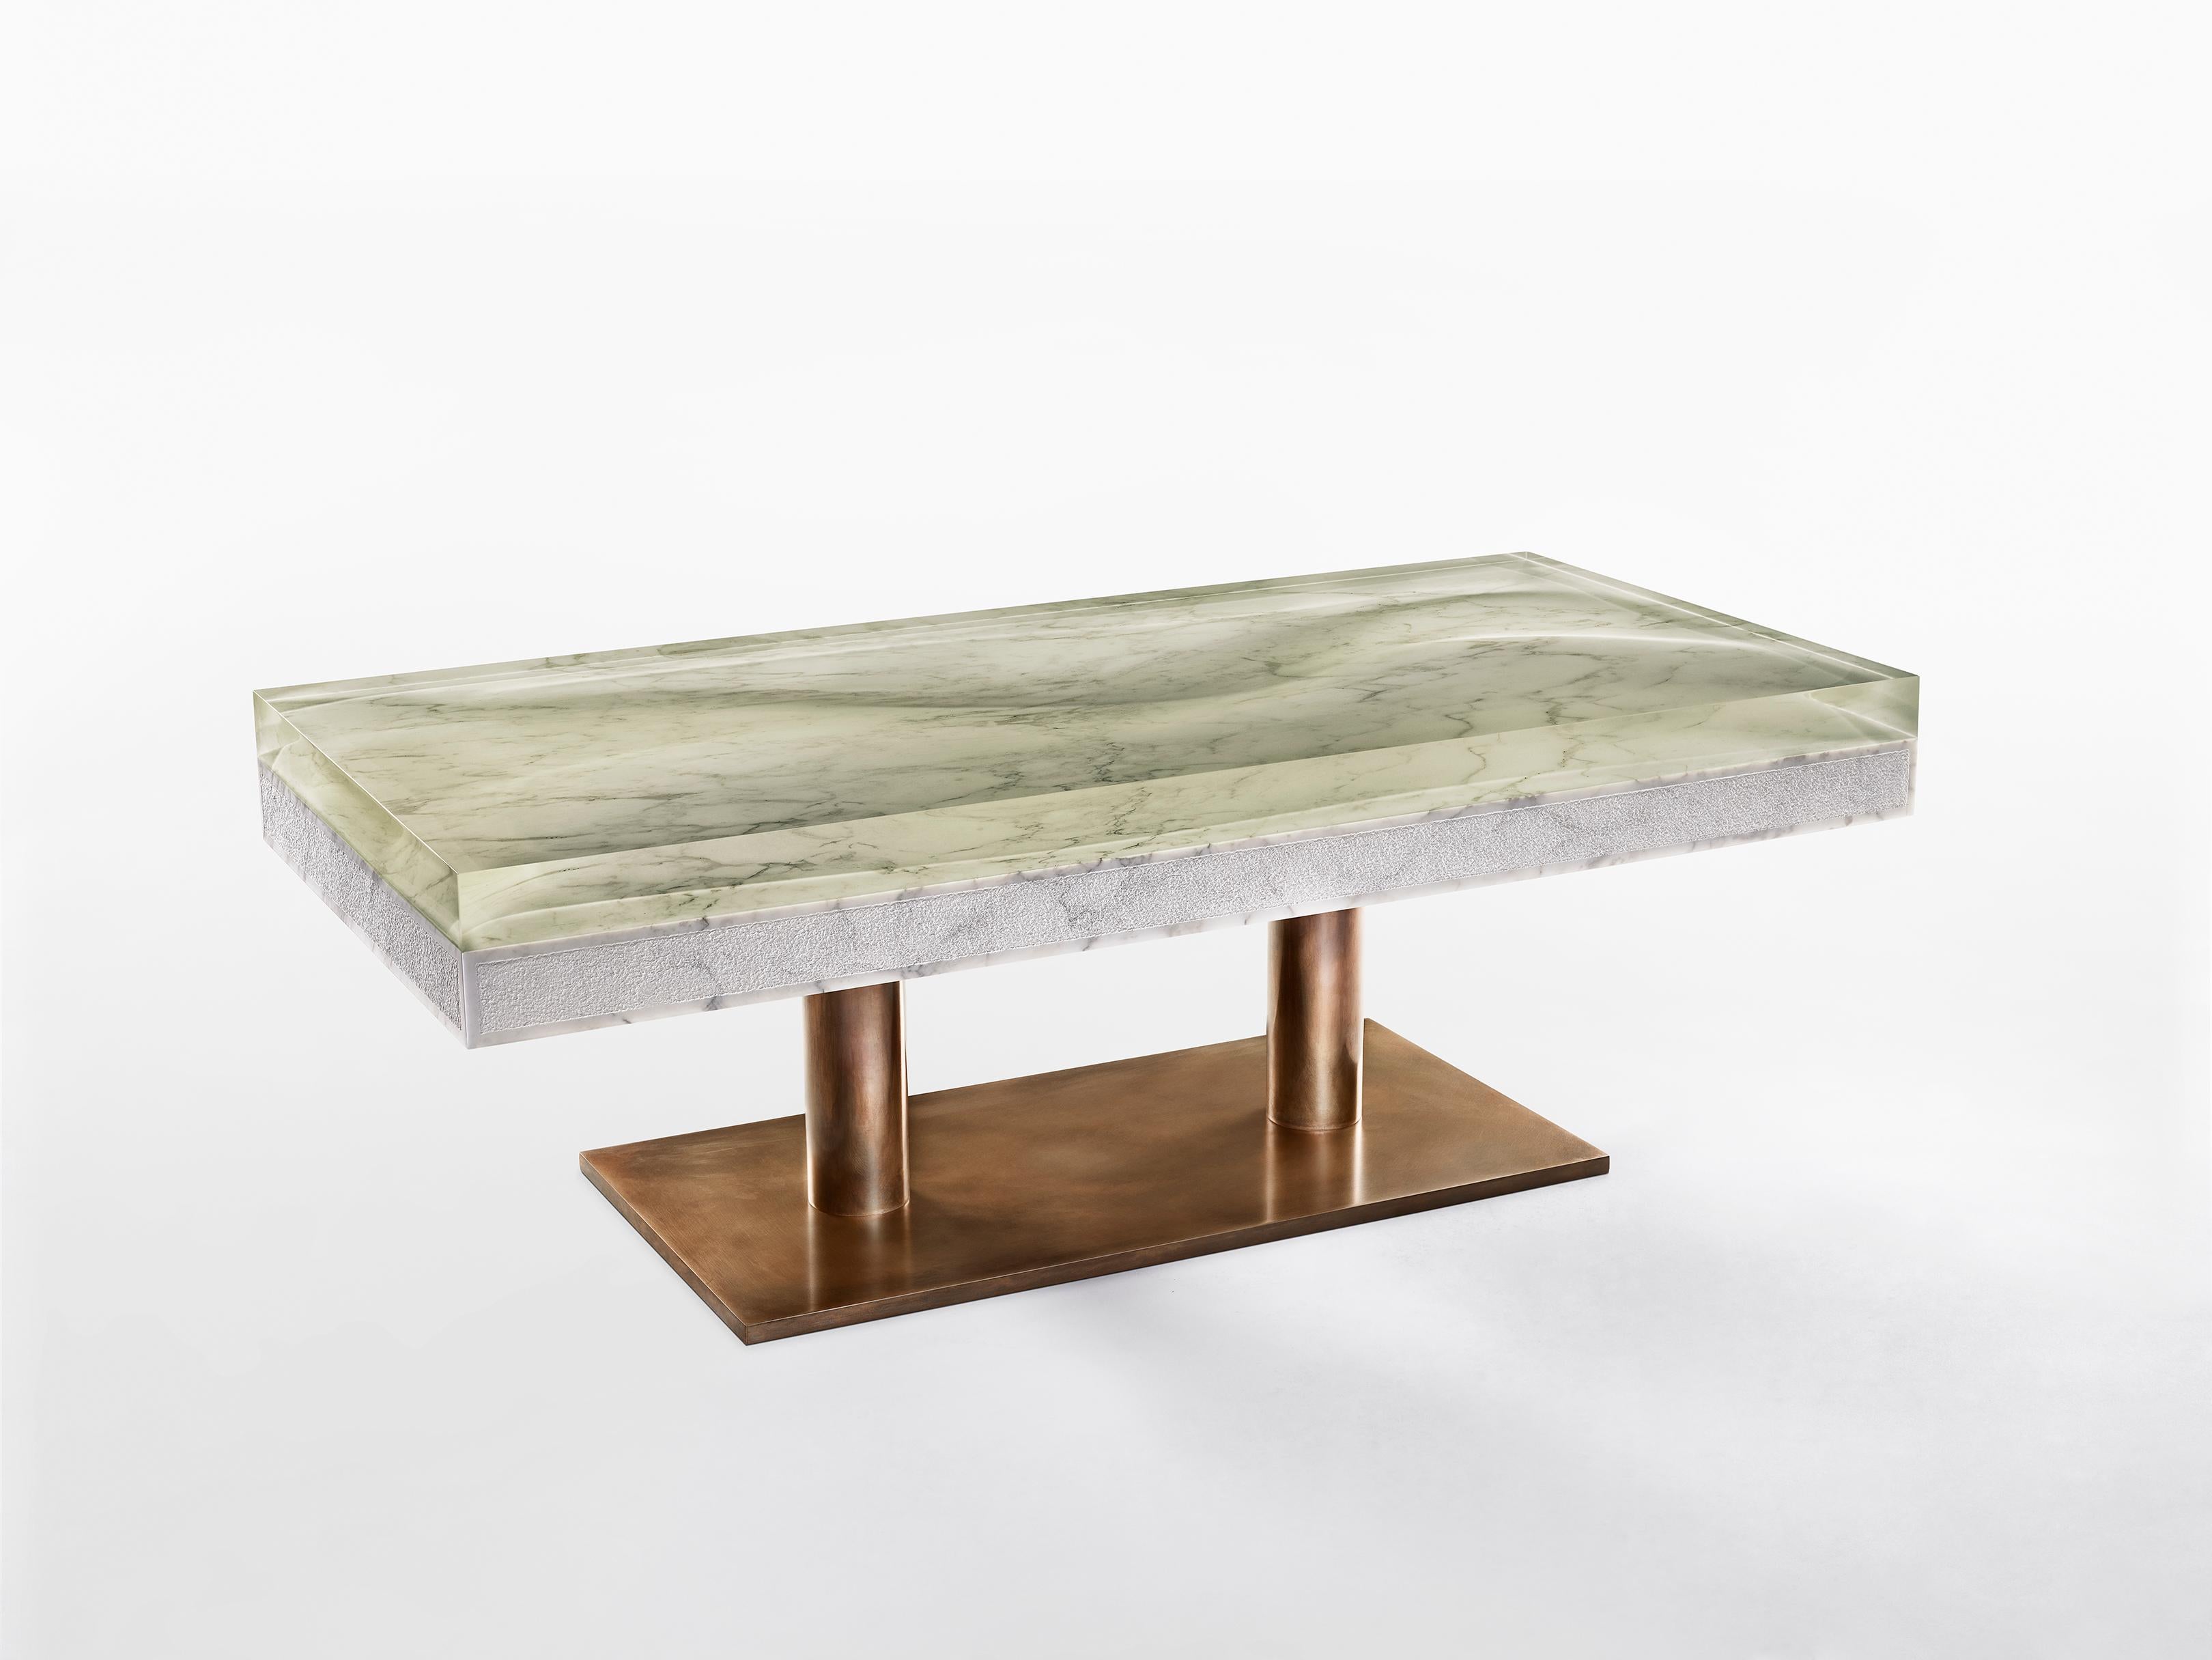 Marble low table by Jonathan Hansen
9 Editions + 1 AP
Dimensions: 116.8 x 55.9 x 40.6 cm
Materials: Calacatta Marble, Architectural Bronze, Resin


SERIES I CAPTUM BIOMORFE is a group of nine sculpture works created by New York artist Jonathan